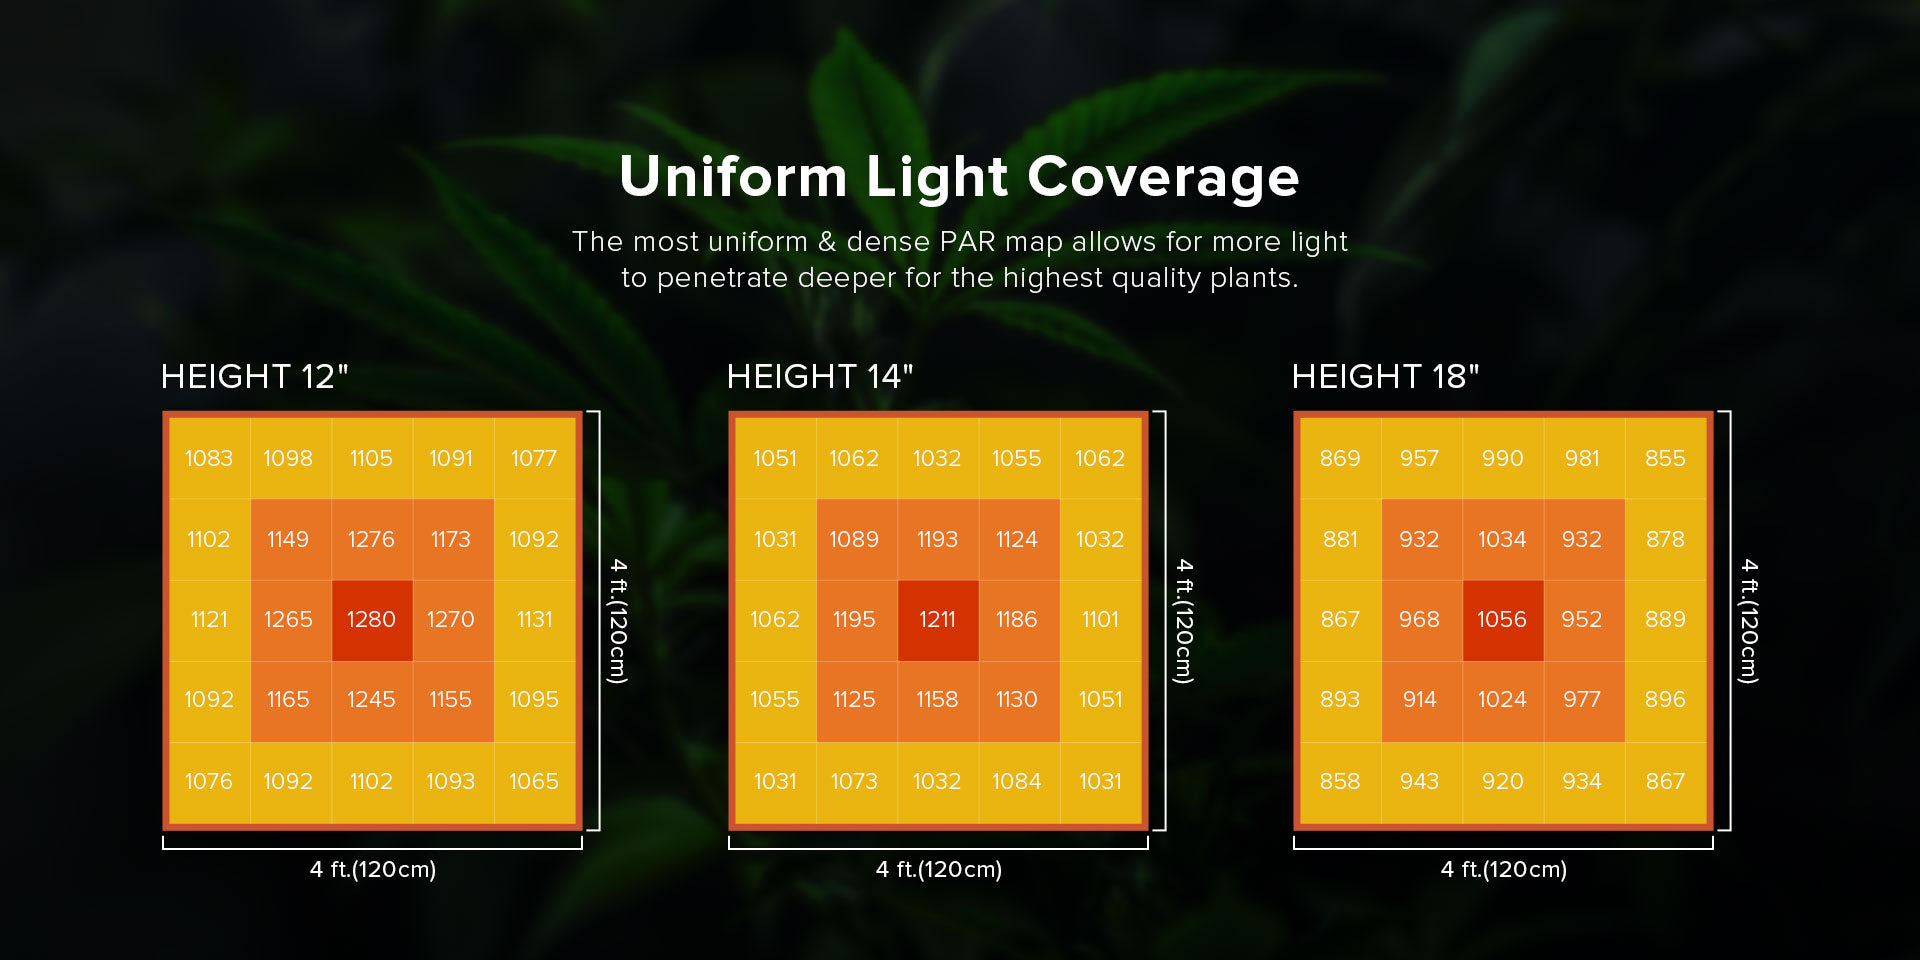 Uniform Light Coverage：The most uniform & dense PAR map allows for more light to penetrate deeper for the highest quality plants.